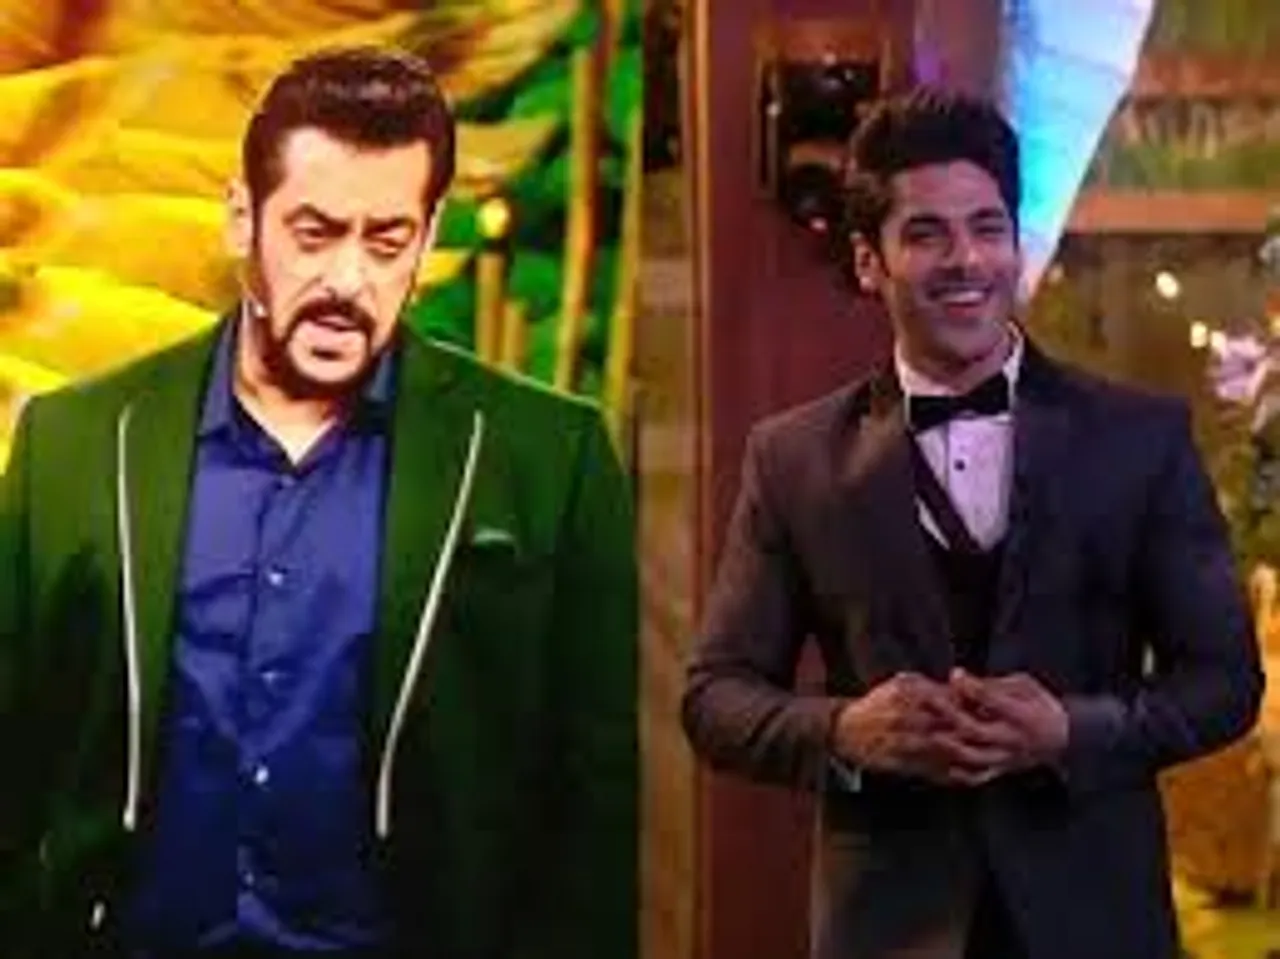 Salman Khan calls Simba Nagpal the most 'real' contestant in BB15; says "The only real contestant was Simba Nagpal and Unfortunately got evicted"!